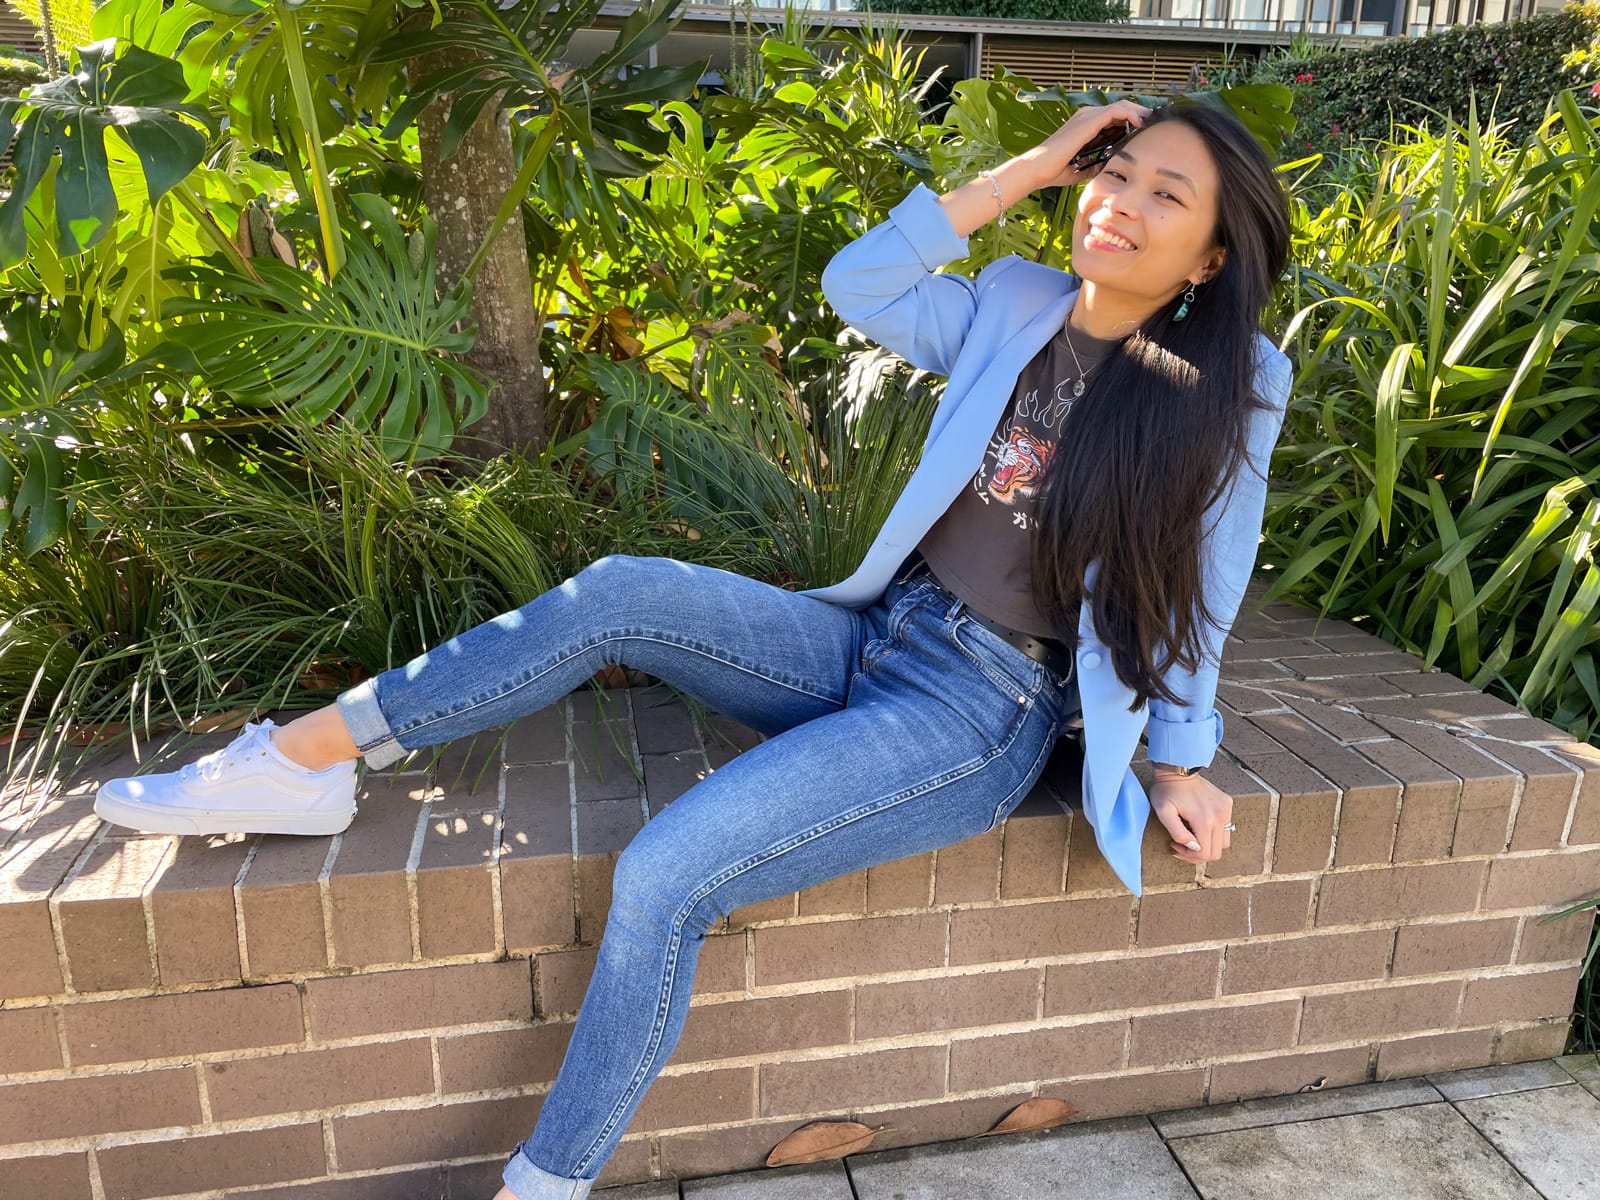 An Asian woman with dark hair, sitting on a brick wall with one leg bent up and a foot on the wall. She is wearing a blue blazer over a dark grey graphic tee and blue jeans. She is wearing white sneakers.